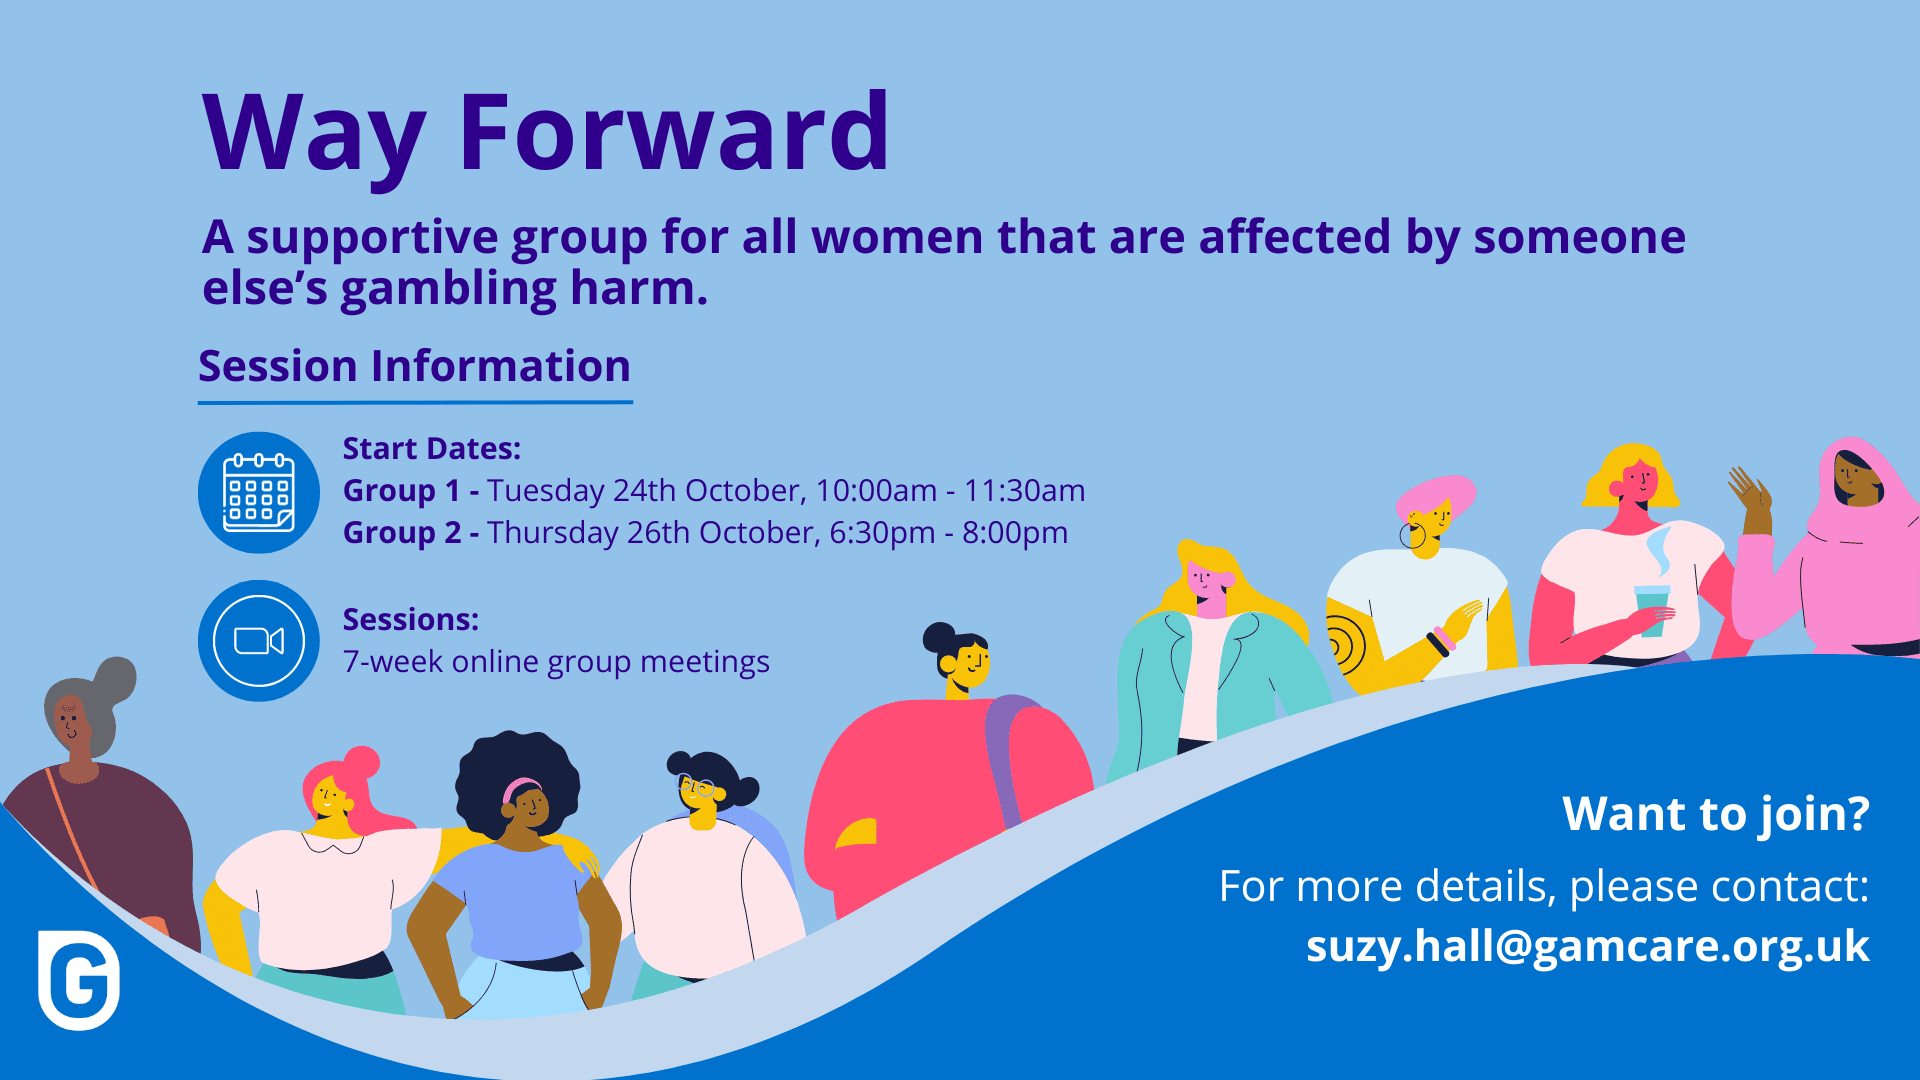 Way Forward - a support group for all women that are affected by someone else's gambling harm. Session information - group 1 starting Tuesday 24th October at 10am - 11.30am. Group 2 starts on Thursday 26th October at 6.30pm - 8pm. Sessions are 7-week online group meetings. To join, contact suzy.hall@gamcare.org.uk for more details.